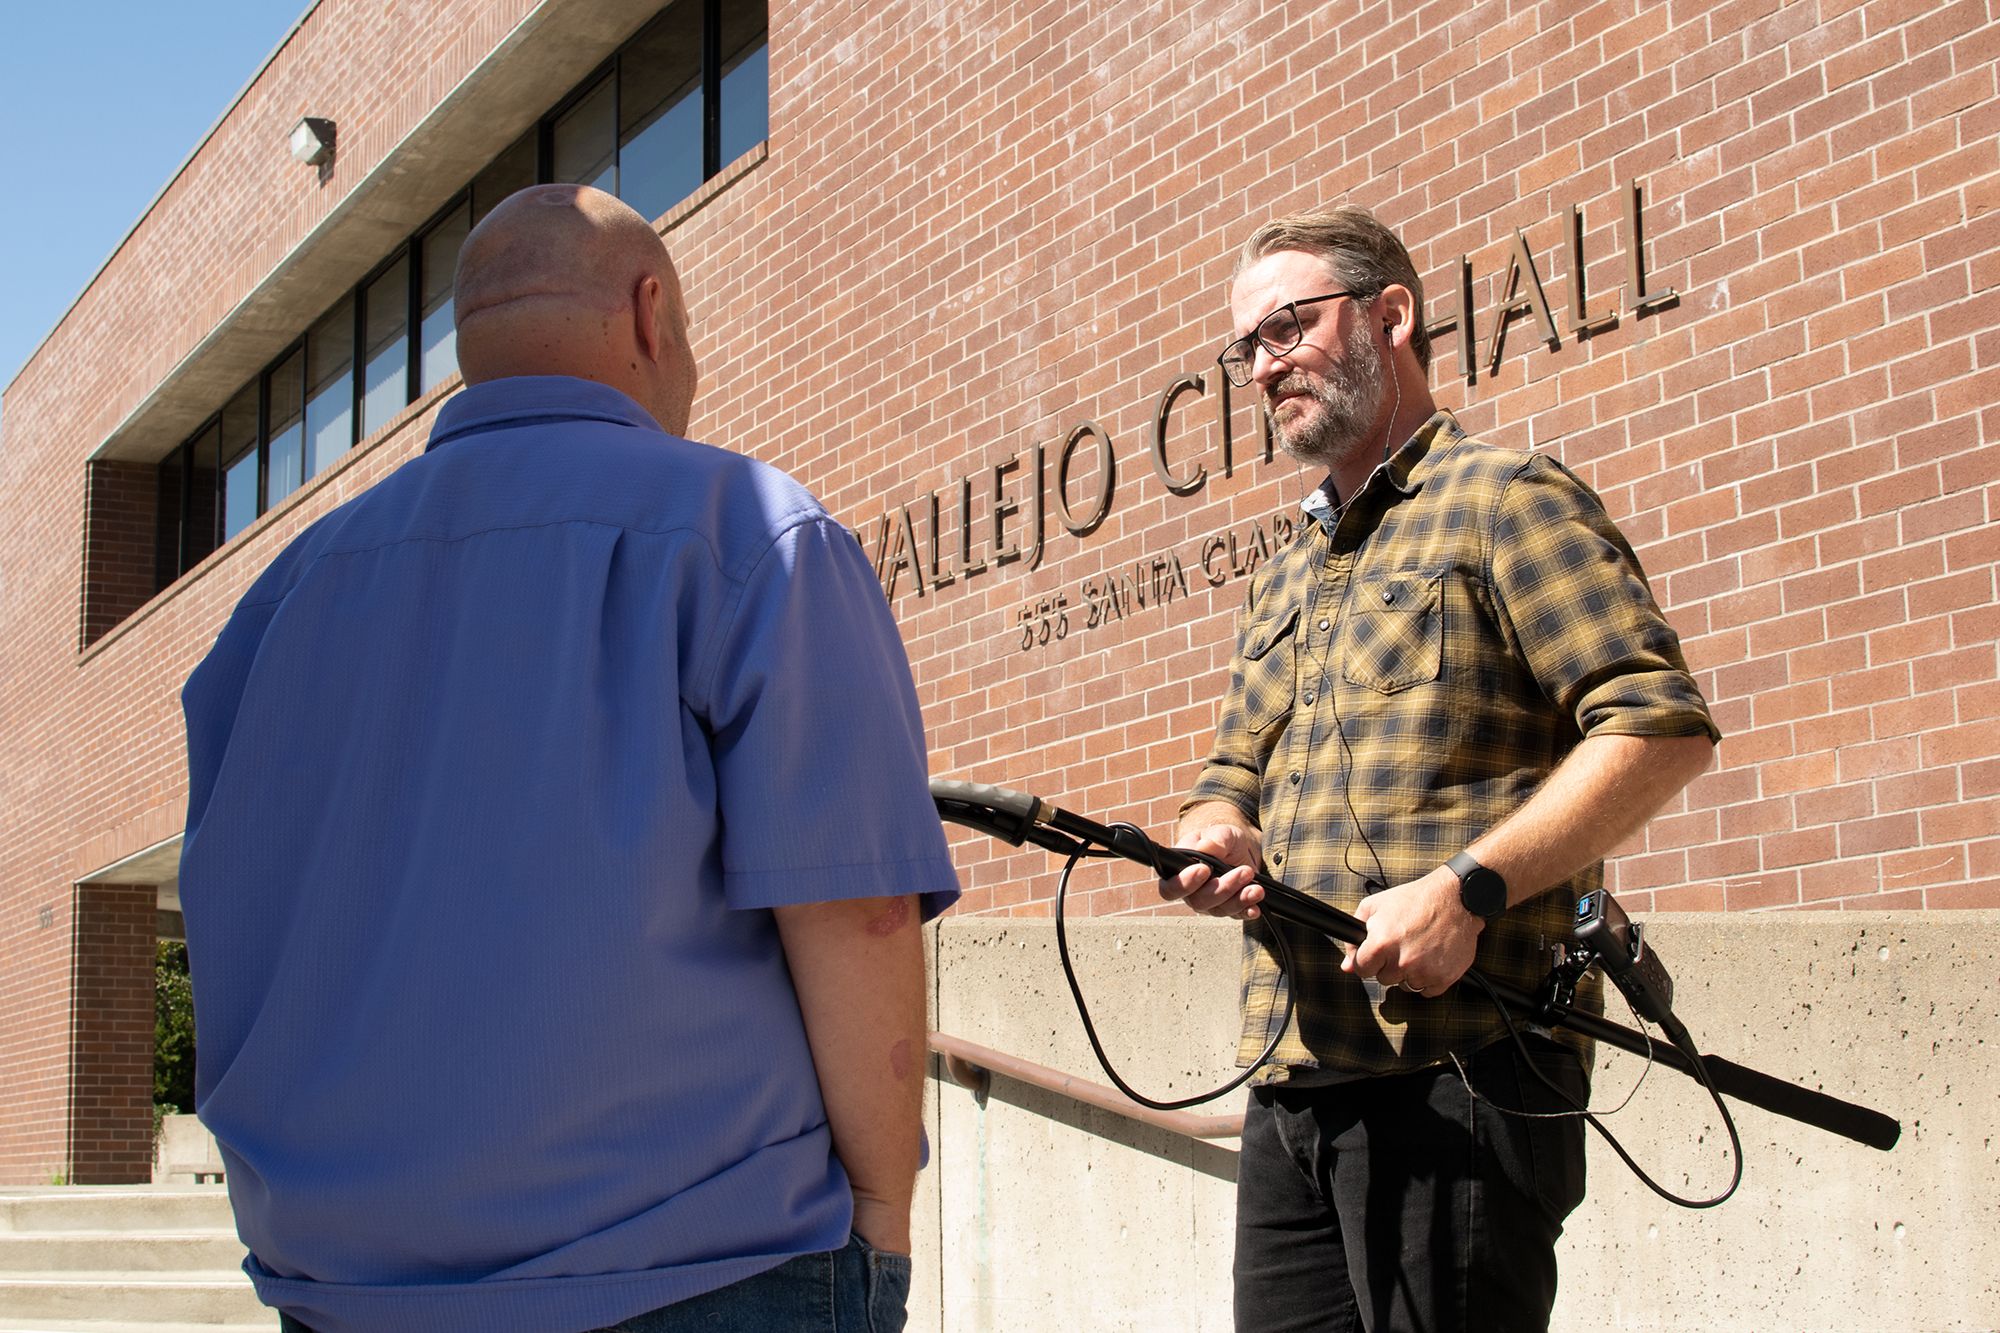 Vallejo Sun co-founder Brian Krans records an interview outside of Vallejo City Hall.